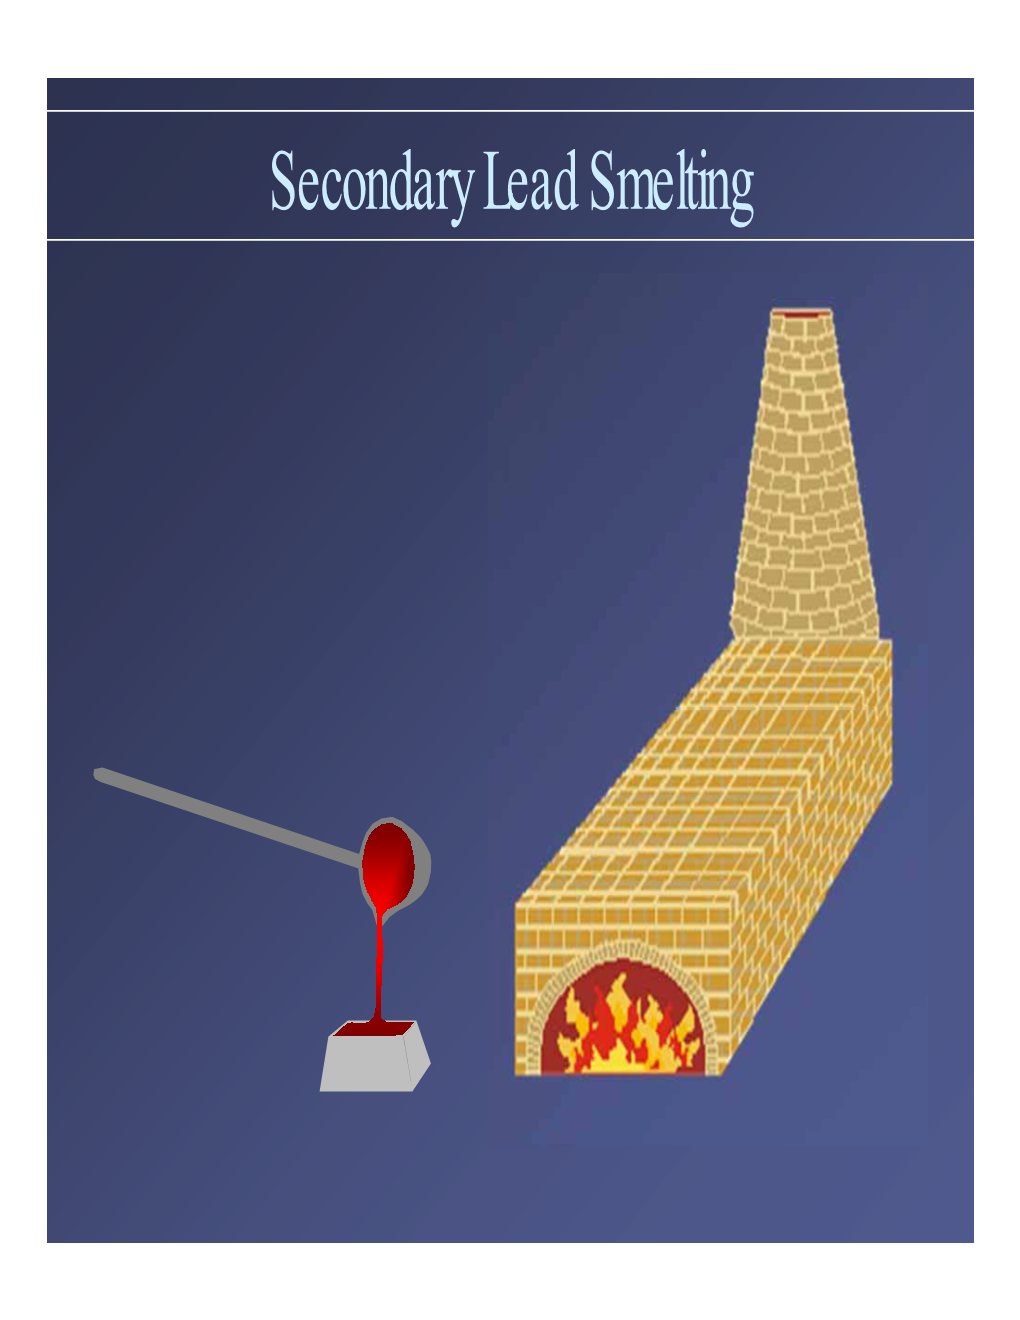 Secondary Lead Smelting Secondary Lead Smelting Objectives